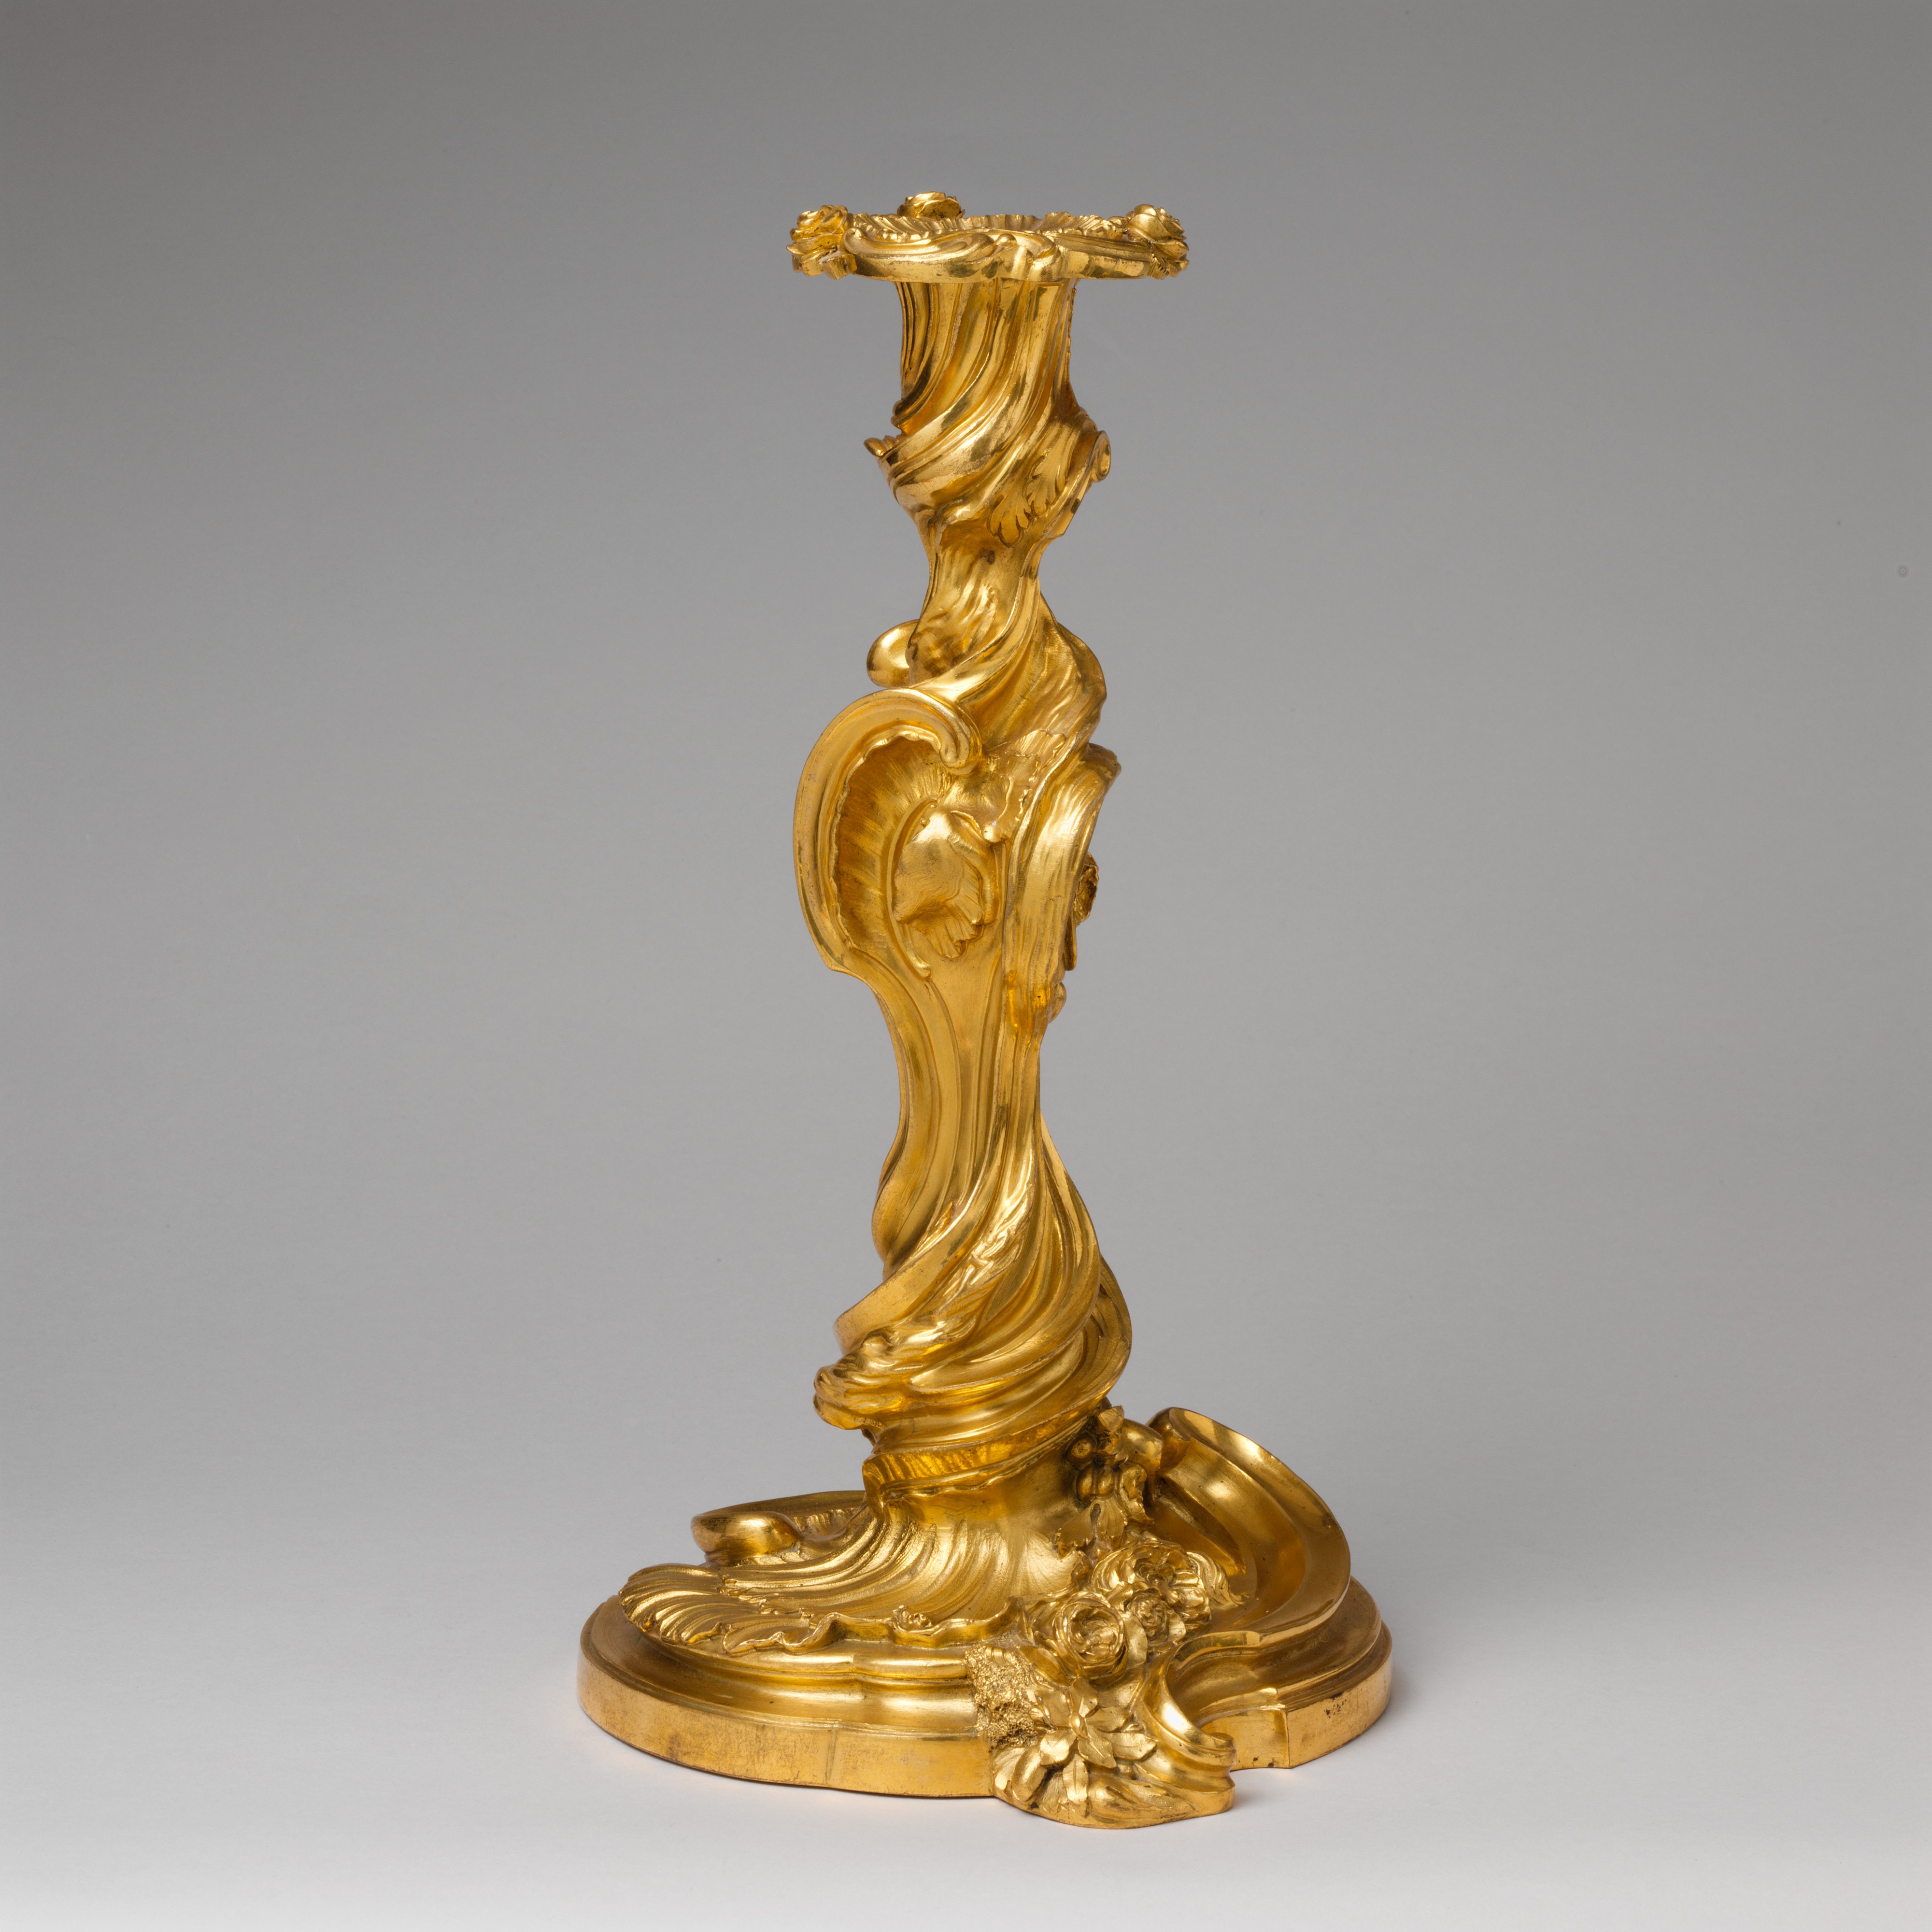 The inspiration for Lumiere came from Rococo candlesticks. This one, by Meissonnier, is a good example for showing its abstract shapes bringing movement to an otherwise inanimate object.